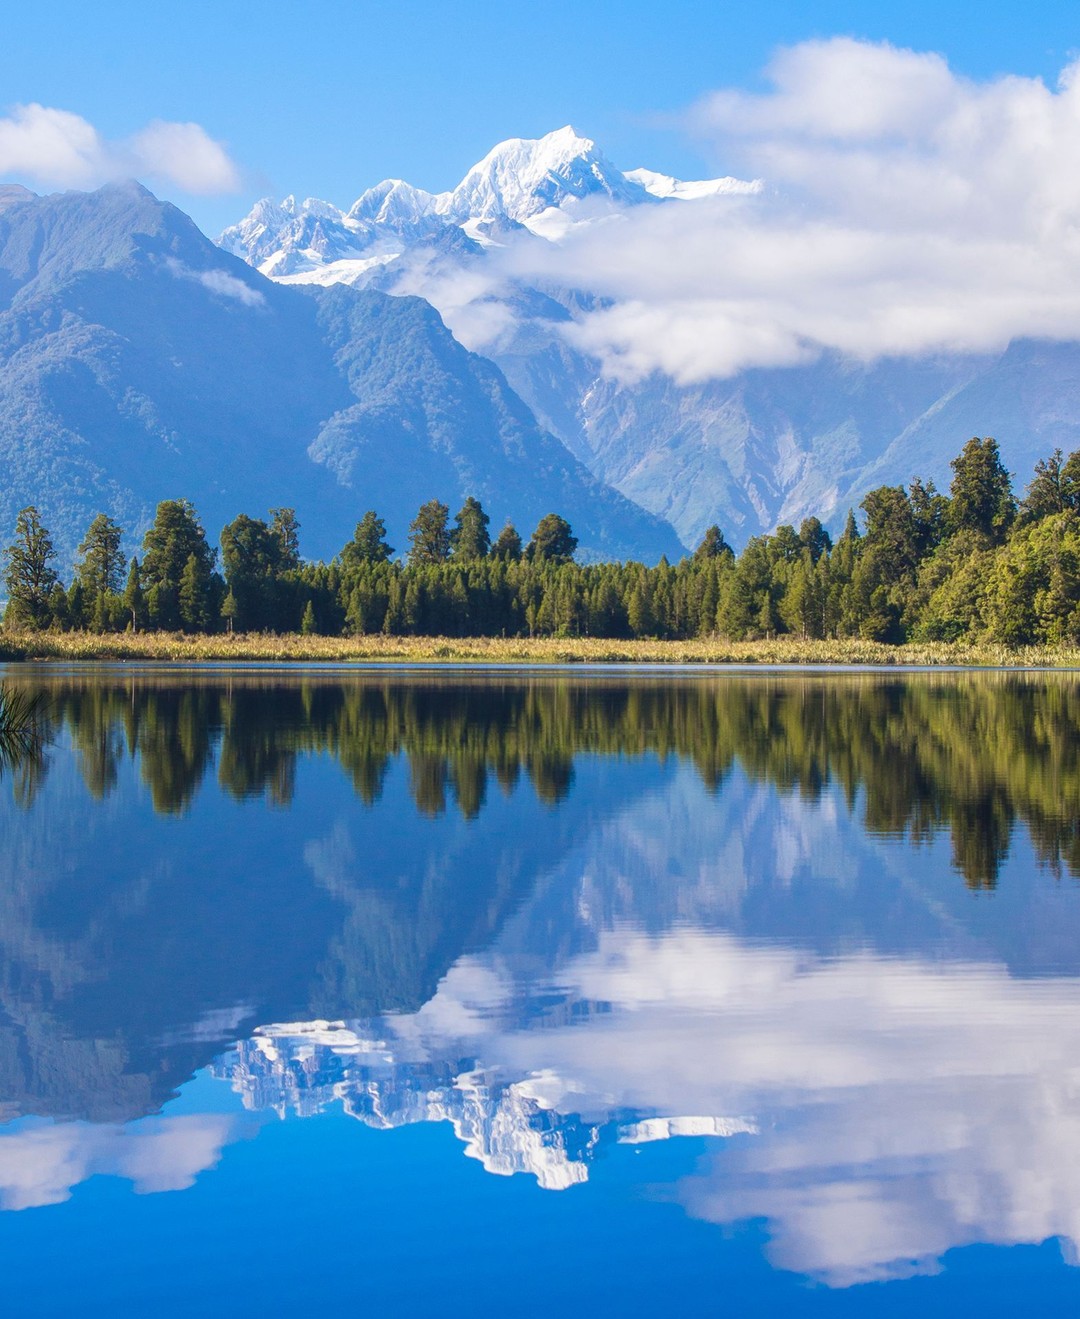 A postcard perfect view across Lake Matheson greets us on @purenewzealand's South Island during our tour of the island with @gadventures and @lonelyplanet. 
New Zealand's highest and second highest mountains – Aoraki / Mount Cook and Mount Tasman – can be seen rising above the still waters of Lake Matheson. 
Mount Tasman at 3,497m (11,473ft) is New Zealand's second highest mountain, while Aoraki / Mount Cook is its highest at 3,724m (12,218ft).
-⠀
-⠀
-⠀
-⠀
-⠀
-⠀
#Aoraki #MountCook #mountcooknz #MountTasman #MtCook #SouthernAlps #Matheson #LakeMatheson #foxglacier #mountcooknationalpark #southislandnewzealand #southisland #southislandnz #newzealand #NZMustDo #RealMiddleEarth #NZ #visitnewzealand #lppathfinders #gadventures #liveoutdoors #bestintravel #thegreatoutdoors #wellhiked #takeahike #hikingadventures #getoutstayout #ig_newzealand #newzealandguide